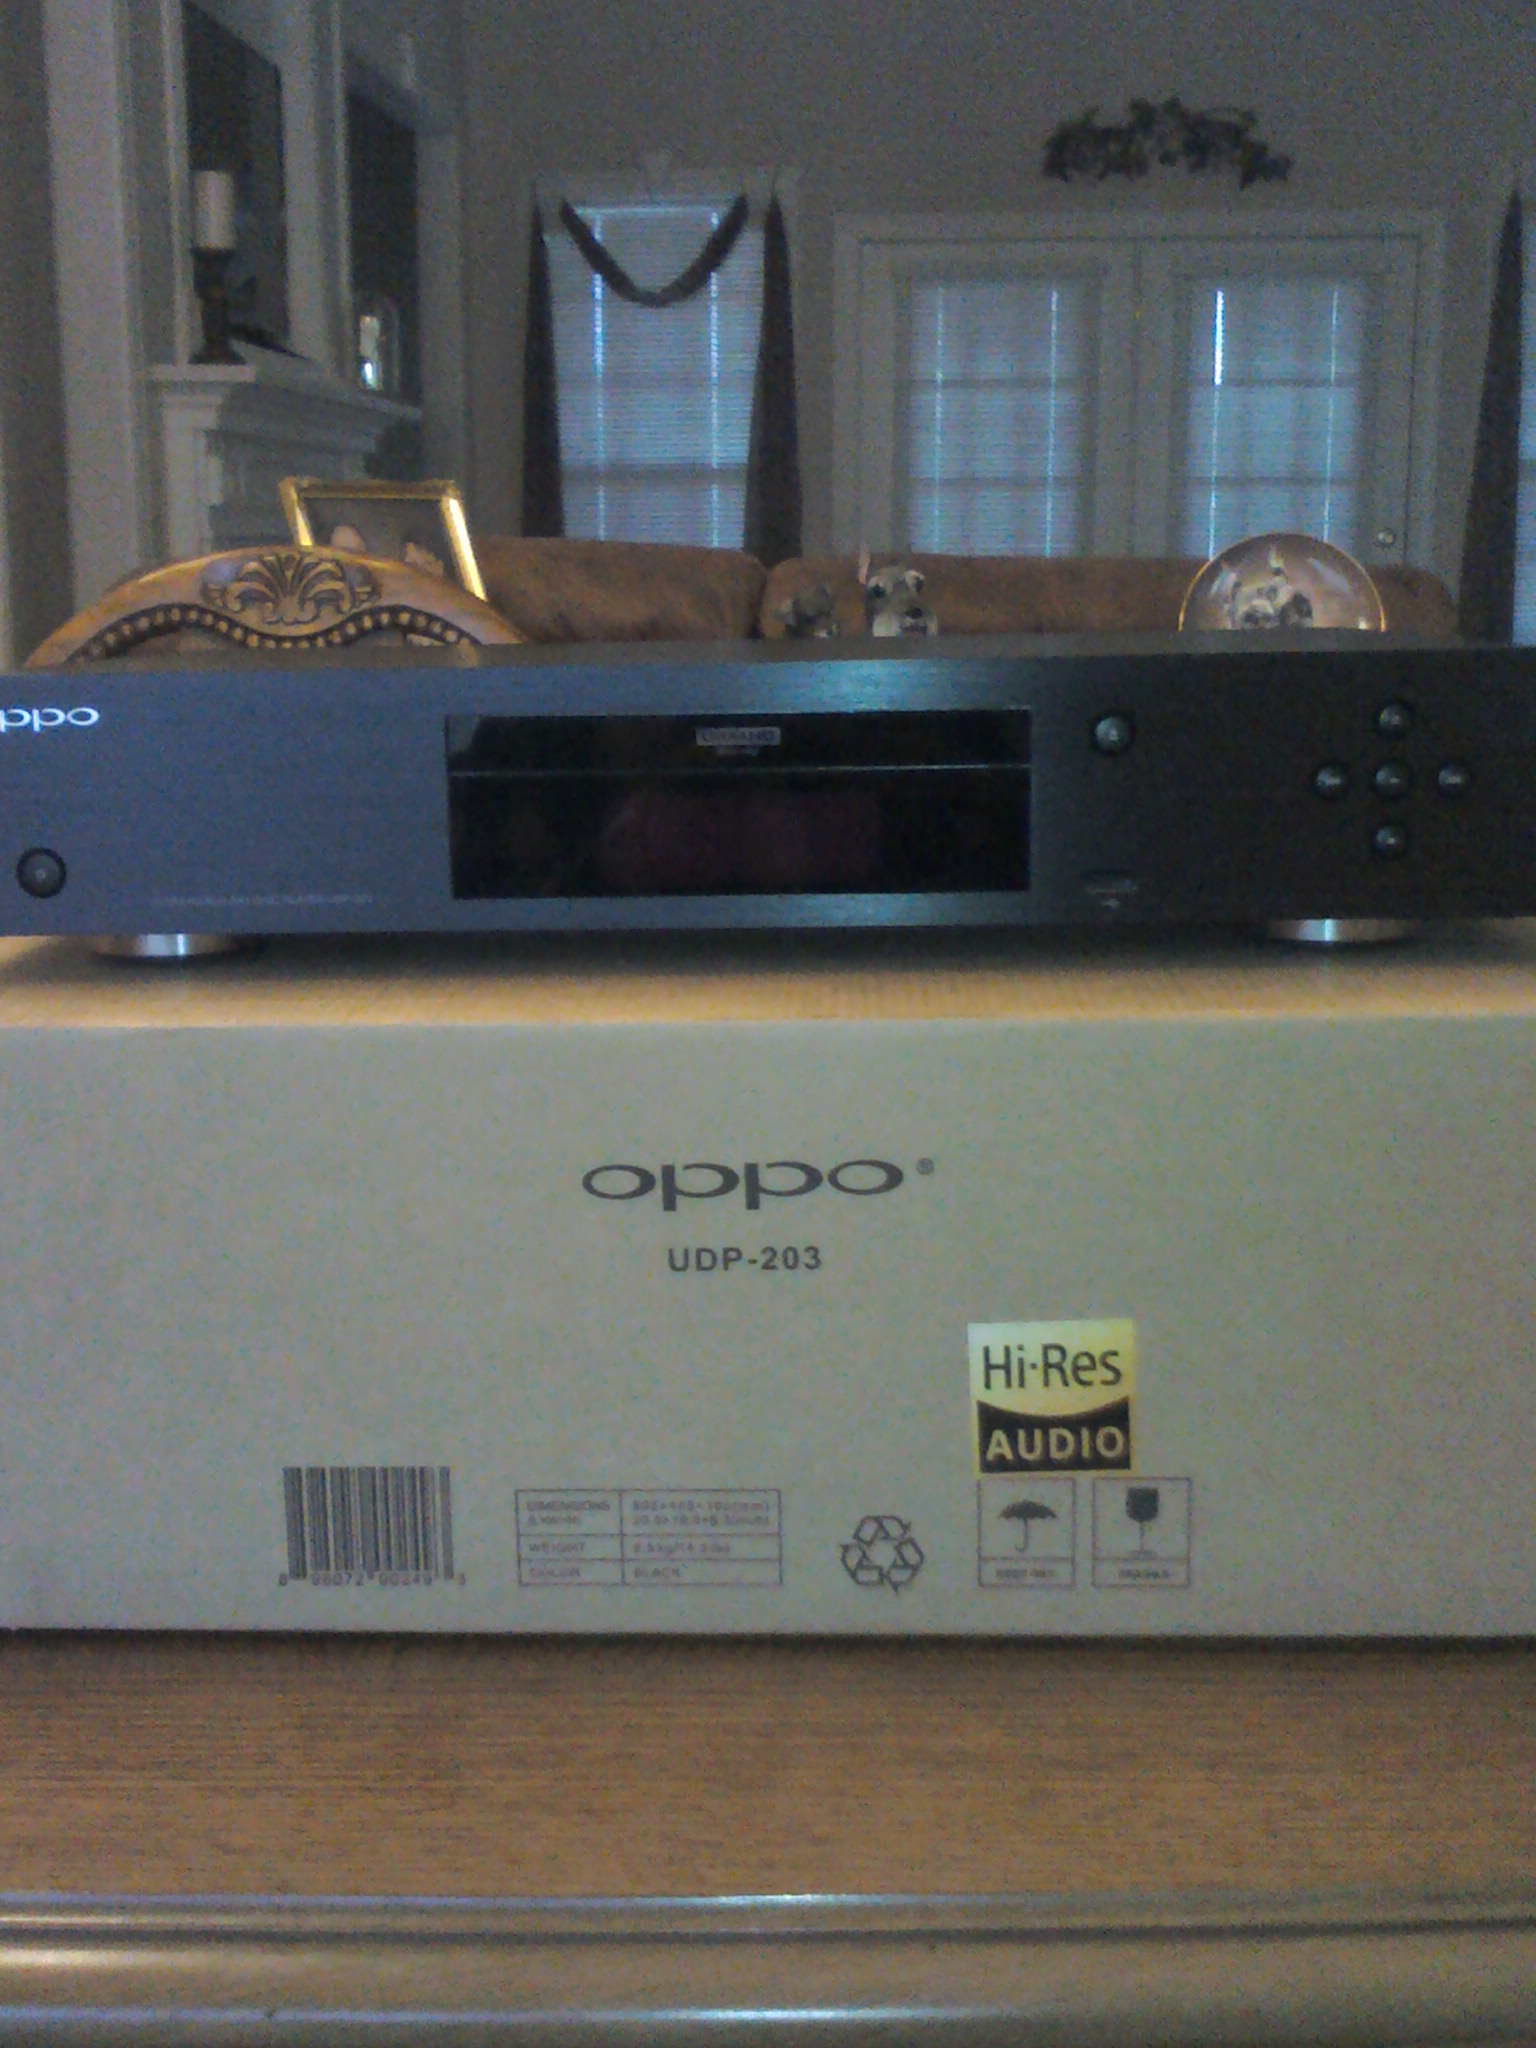 OPPO UDP-203 4K Ultra HD Blu-Ray Player For Sale | Audiogon